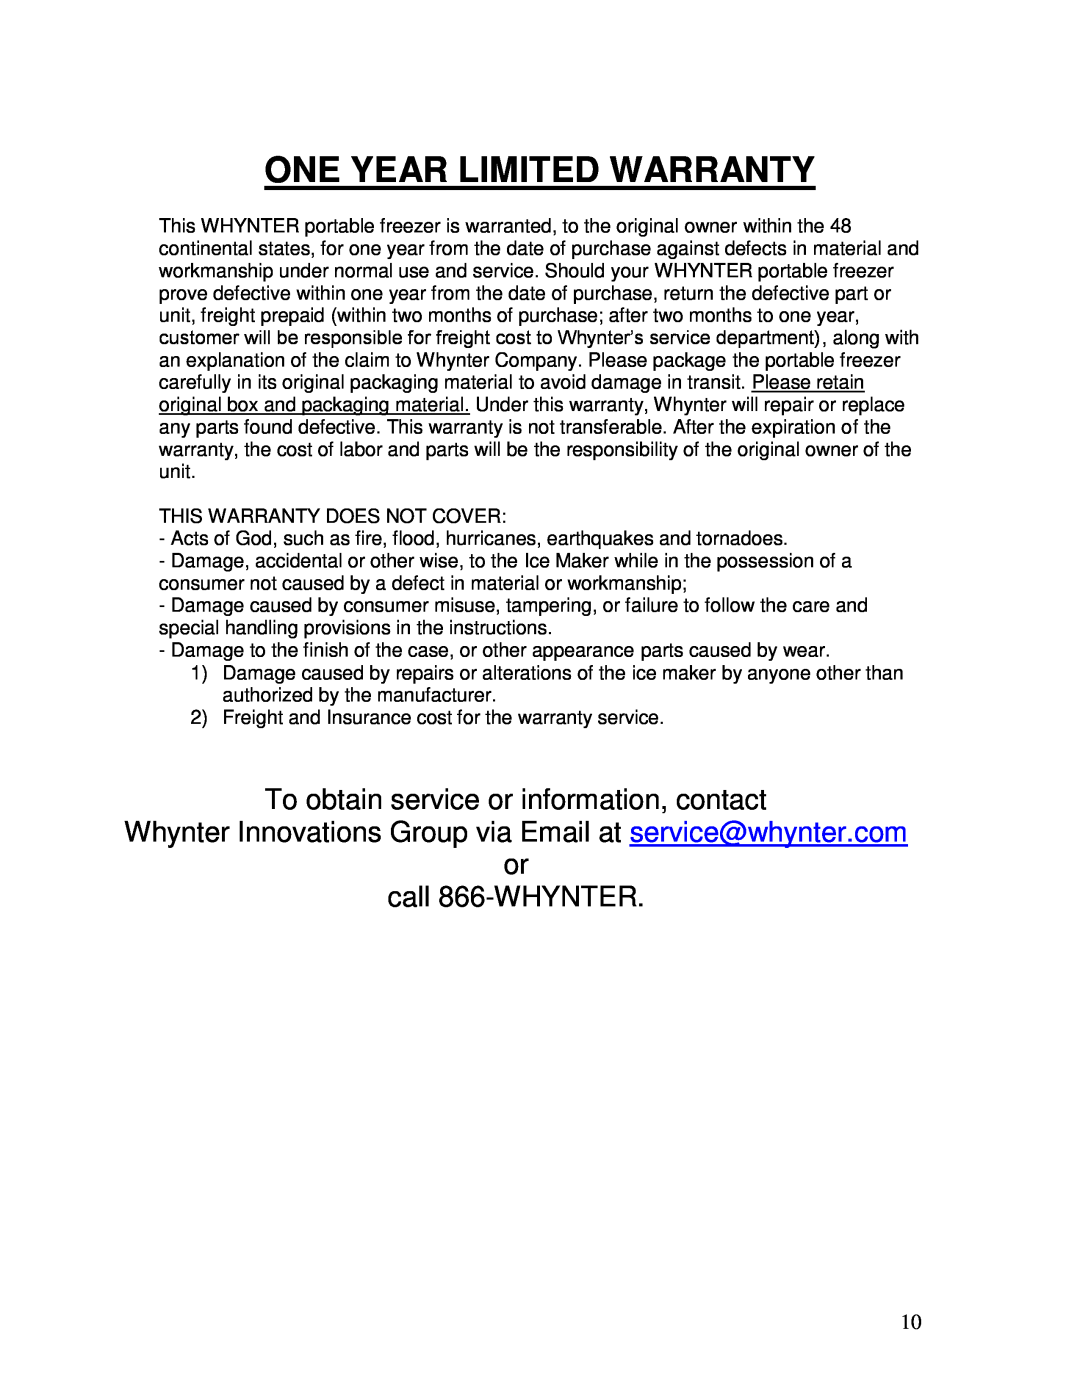 Whynter fm-65g, FM-45G, FM-85G One Year Limited Warranty, To obtain service or information, contact, or call 866-WHYNTER 